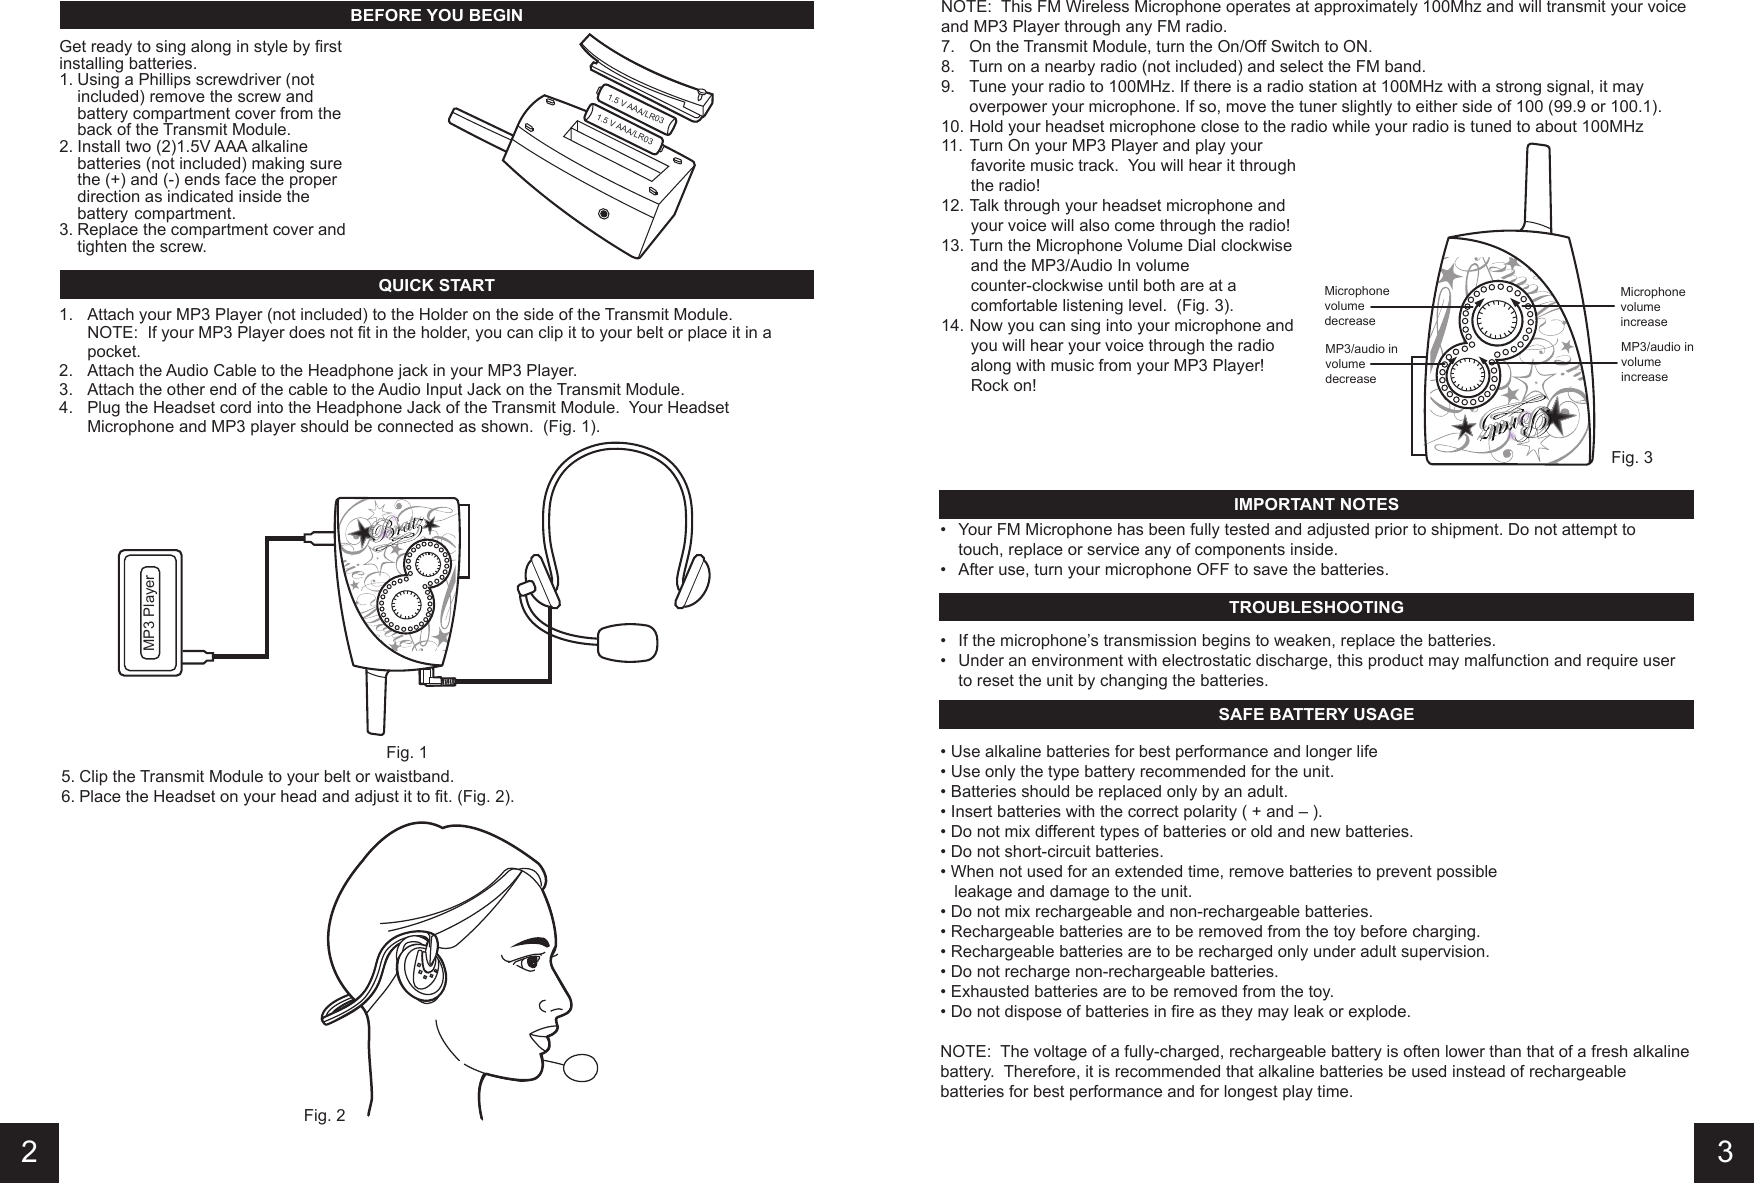 11.  Turn On your MP3 Player and play your     favorite music track.  You will hear it through     the radio!12. Talk through your headset microphone and     your voice will also come through the radio!13. Turn the Microphone Volume Dial clockwise     and the MP3/Audio In volume       counter-clockwise until both are at a     comfortable listening level.  (Fig. 3).14. Now you can sing into your microphone and     you will hear your voice through the radio     along with music from your MP3 Player!      Rock on!  •  Your FM Microphone has been fully tested and adjusted prior to shipment. Do not attempt to    touch, replace or service any of components inside.  •  After use, turn your microphone OFF to save the batteries.  • Use alkaline batteries for best performance and longer life• Use only the type battery recommended for the unit. • Batteries should be replaced only by an adult. • Insert batteries with the correct polarity ( + and – ). • Do not mix different types of batteries or old and new batteries. • Do not short-circuit batteries. • When not used for an extended time, remove batteries to prevent possible    leakage and damage to the unit.• Do not mix rechargeable and non-rechargeable batteries.• Rechargeable batteries are to be removed from the toy before charging. • Rechargeable batteries are to be recharged only under adult supervision. • Do not recharge non-rechargeable batteries. • Exhausted batteries are to be removed from the toy. • Do not dispose of batteries in fire as they may leak or explode. NOTE:  The voltage of a fully-charged, rechargeable battery is often lower than that of a fresh alkaline battery.  Therefore, it is recommended that alkaline batteries be used instead of rechargeable batteries for best performance and for longest play time.•  If the microphone’s transmission begins to weaken, replace the batteries.•  Under an environment with electrostatic discharge, this product may malfunction and require user    to reset the unit by changing the batteries.5. Clip the Transmit Module to your belt or waistband.6. Place the Headset on your head and adjust it to fit. (Fig. 2).NOTE:  This FM Wireless Microphone operates at approximately 100Mhz and will transmit your voice and MP3 Player through any FM radio.7.  On the Transmit Module, turn the On/Off Switch to ON.8.  Turn on a nearby radio (not included) and select the FM band.9.  Tune your radio to 100MHz. If there is a radio station at 100MHz with a strong signal, it may    overpower your microphone. If so, move the tuner slightly to either side of 100 (99.9 or 100.1).10. Hold your headset microphone close to the radio while your radio is tuned to about 100MHz1.  Attach your MP3 Player (not included) to the Holder on the side of the Transmit Module.  NOTE:  If your MP3 Player does not fit in the holder, you can clip it to your belt or place it in a    pocket.2.  Attach the Audio Cable to the Headphone jack in your MP3 Player.3.  Attach the other end of the cable to the Audio Input Jack on the Transmit Module.4.  Plug the Headset cord into the Headphone Jack of the Transmit Module.  Your Headset     Microphone and MP3 player should be connected as shown.  (Fig. 1).QUICK STARTIMPORTANT NOTESTROUBLESHOOTINGSAFE BATTERY USAGE32BEFORE YOU BEGINGet ready to sing along in style by first installing batteries. 1. Using a Phillips screwdriver (not    included) remove the screw and    battery compartment cover from the    back of the Transmit Module.2. Install two (2)1.5V AAA alkaline    batteries (not included) making sure    the (+) and (-) ends face the proper    direction as indicated inside the    battery  compartment.3. Replace the compartment cover and    tighten the screw. MicrophonevolumedecreaseMP3/audio involumedecreaseMP3/audio involumeincreaseMicrophonevolumeincreaseMP3 PlayerFig. 1Fig. 2Fig. 31.5 V AAA/LR031.5 V AAA/LR03